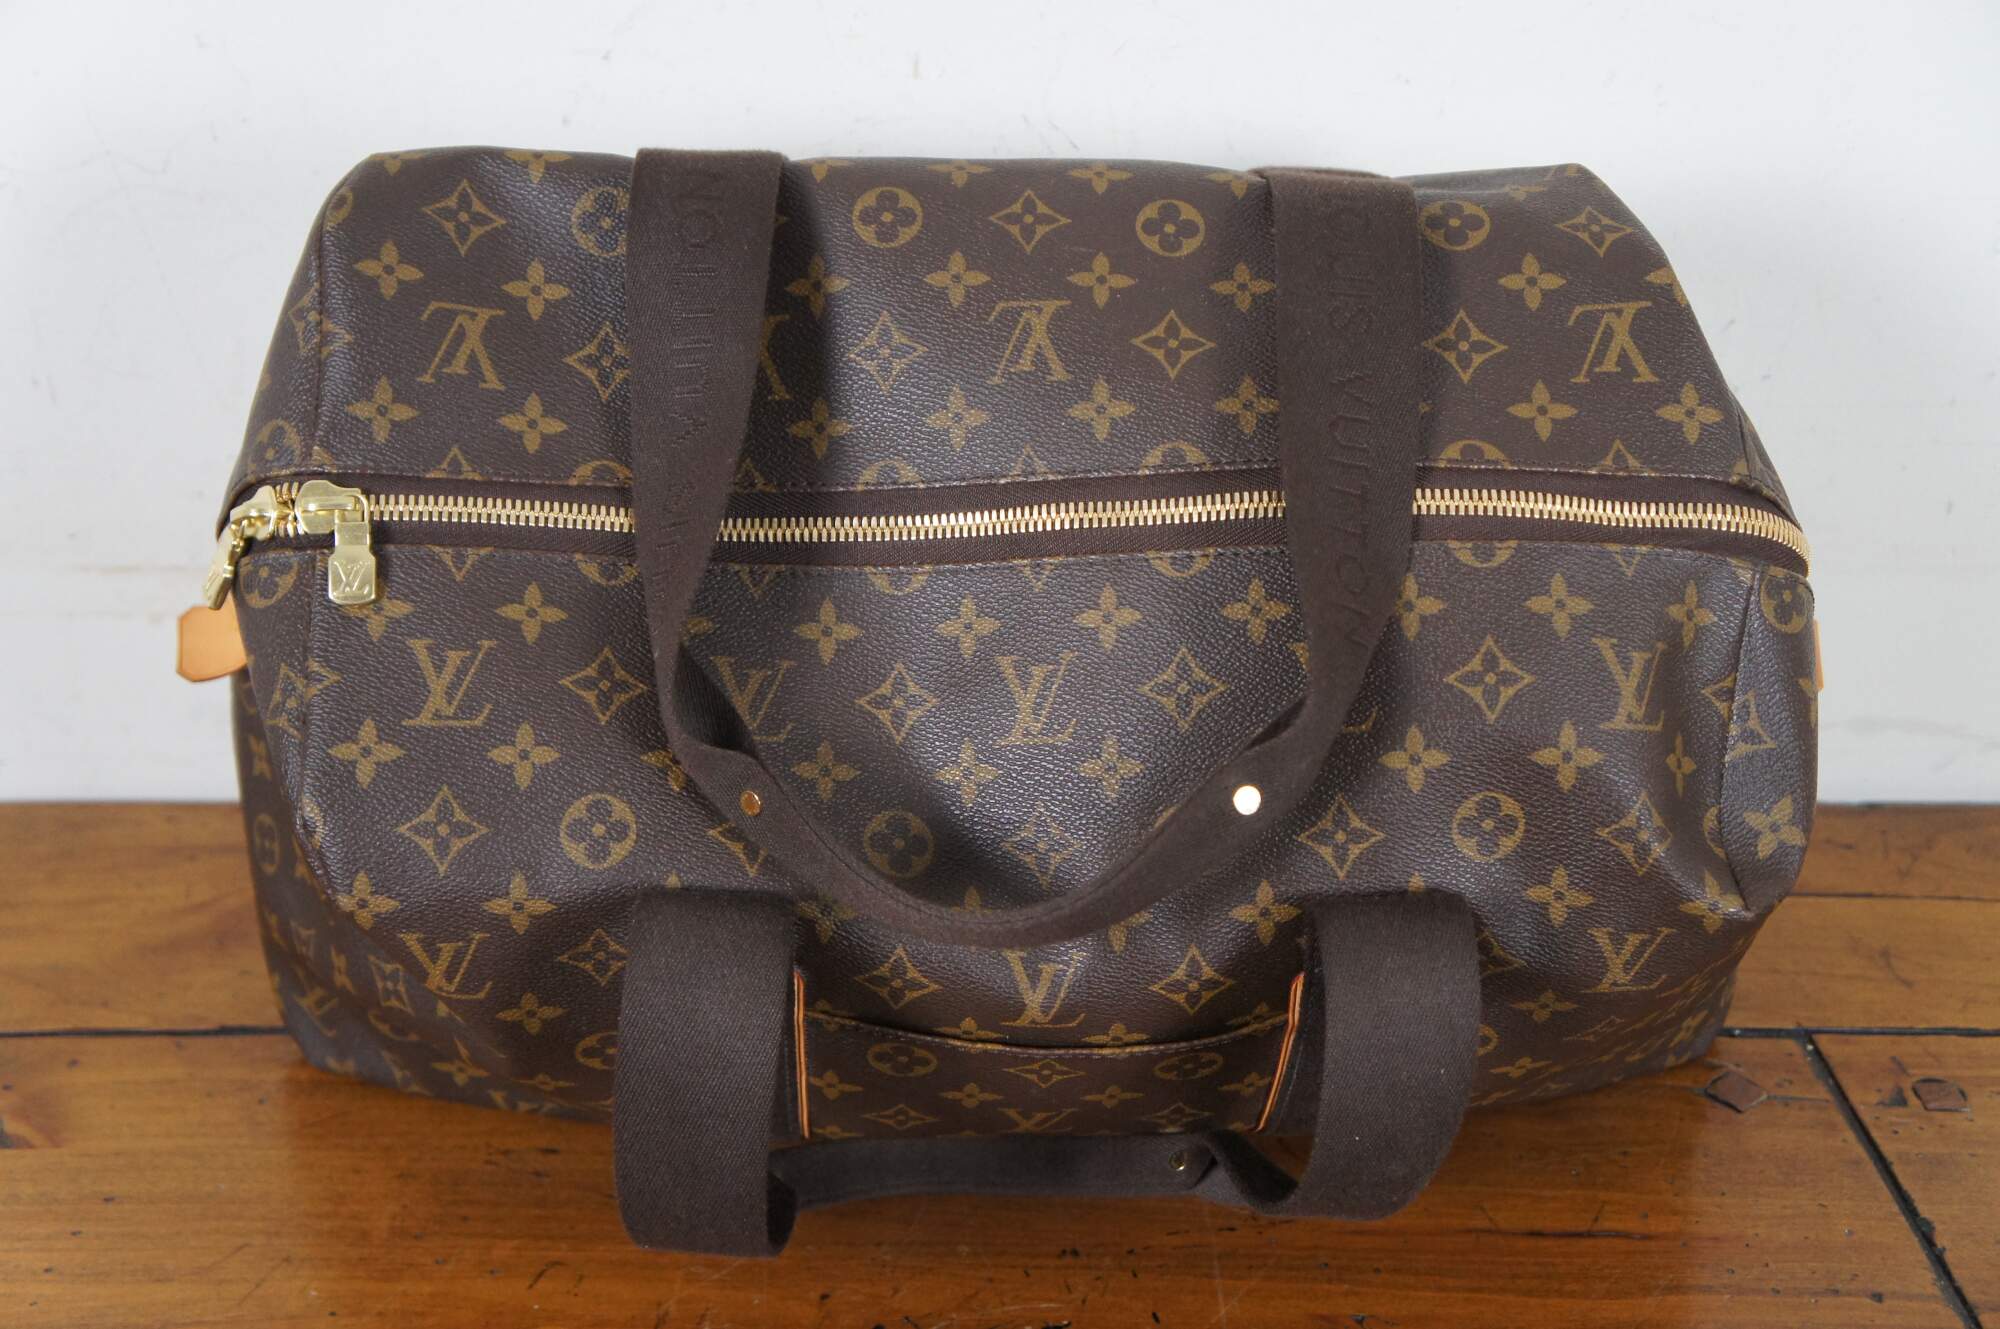 Pre-owned Louis Vuitton Monogram Canvas Beaubourg Sporty Duffle